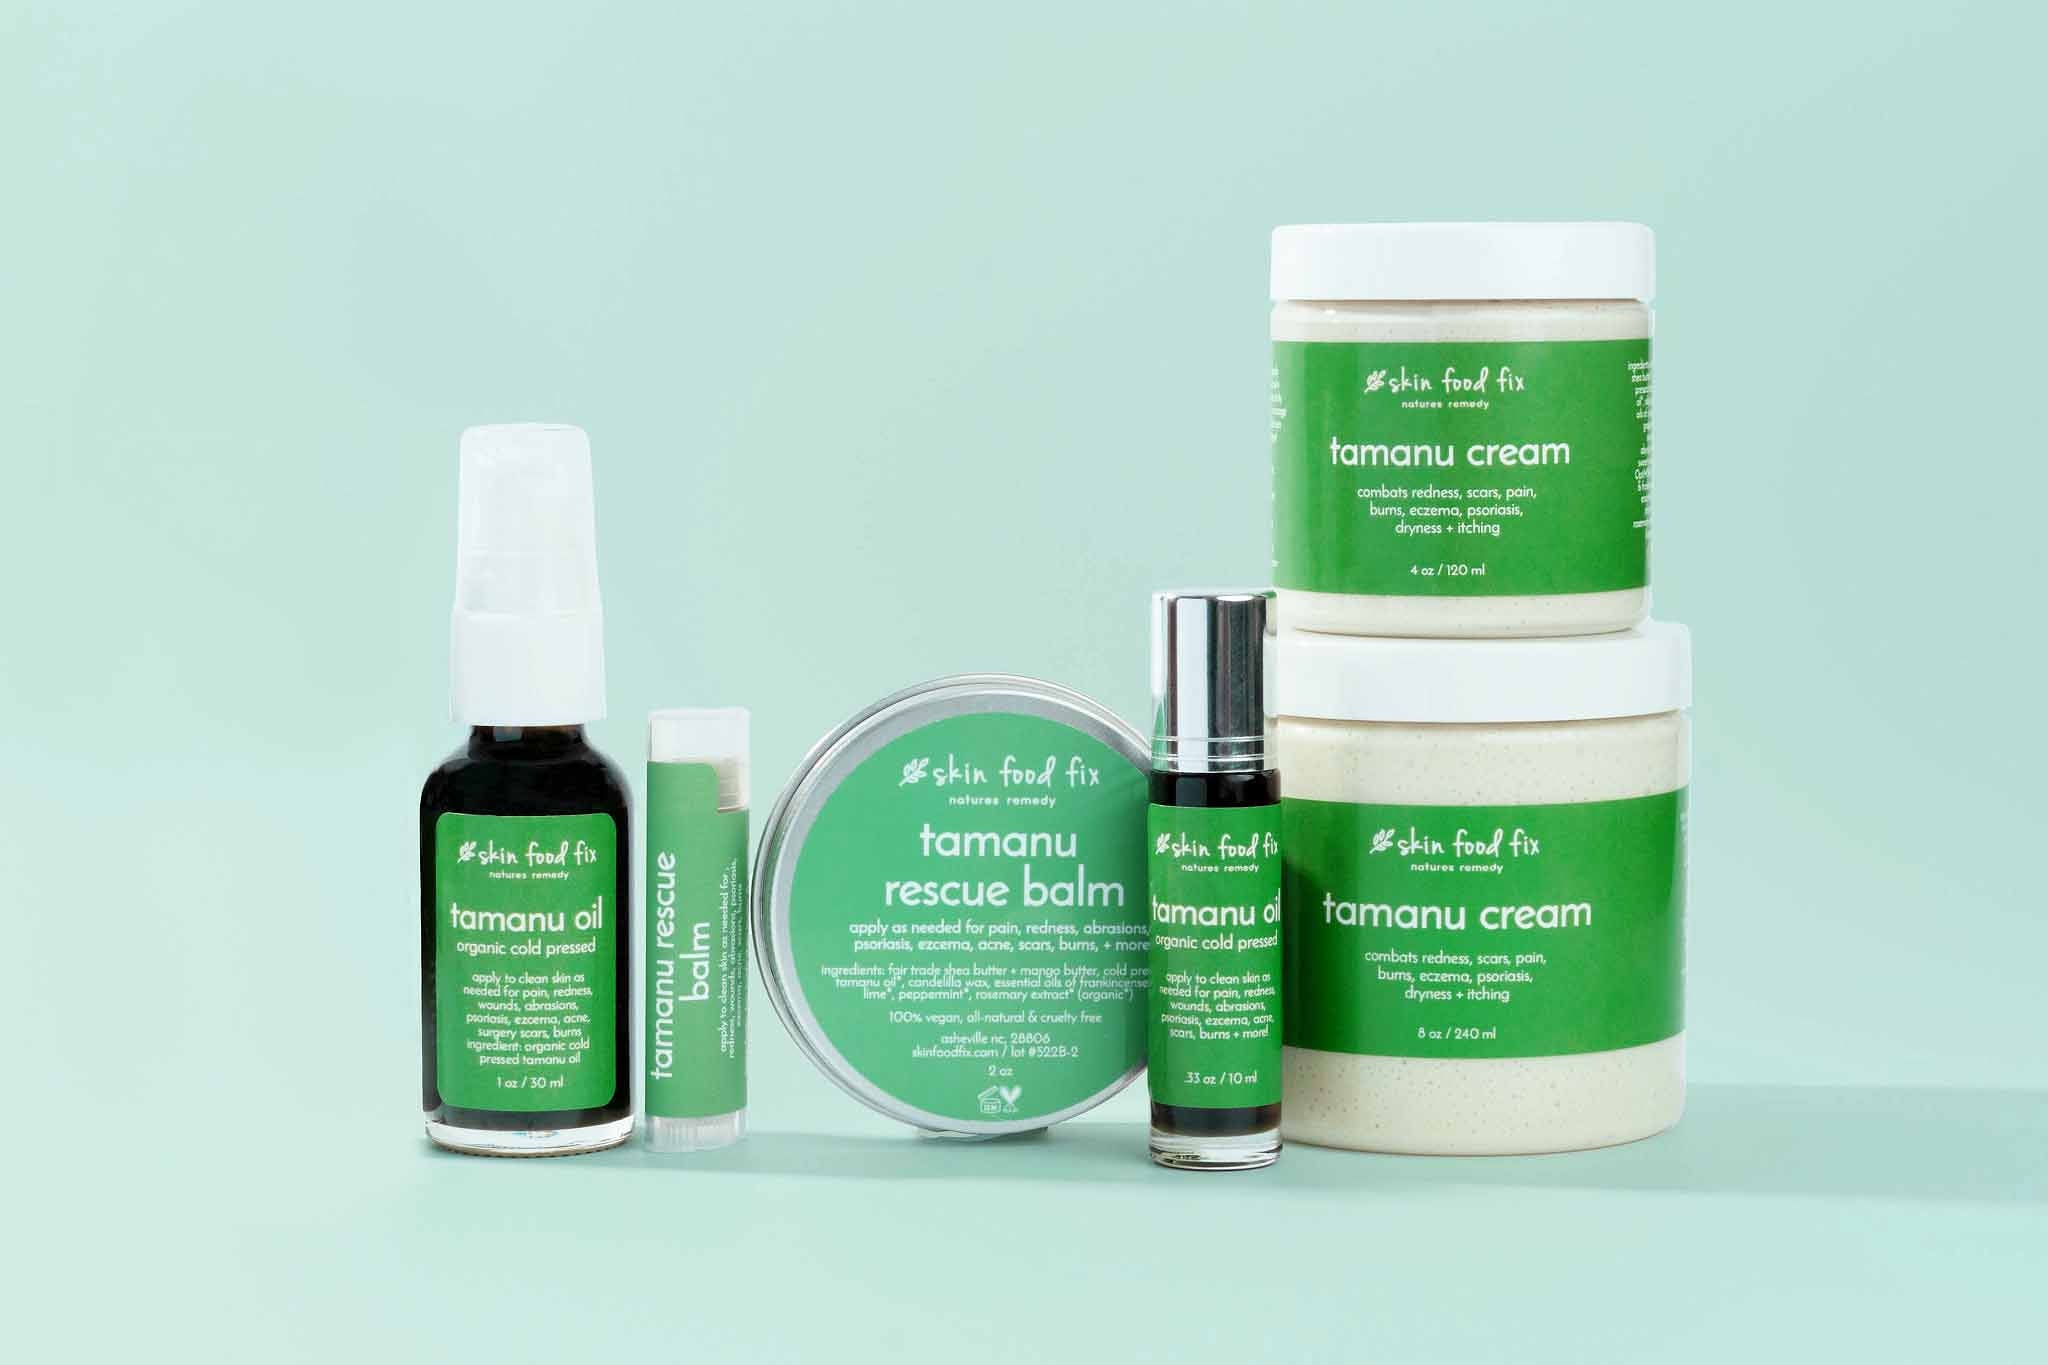 tamanu oil skincare products first aid